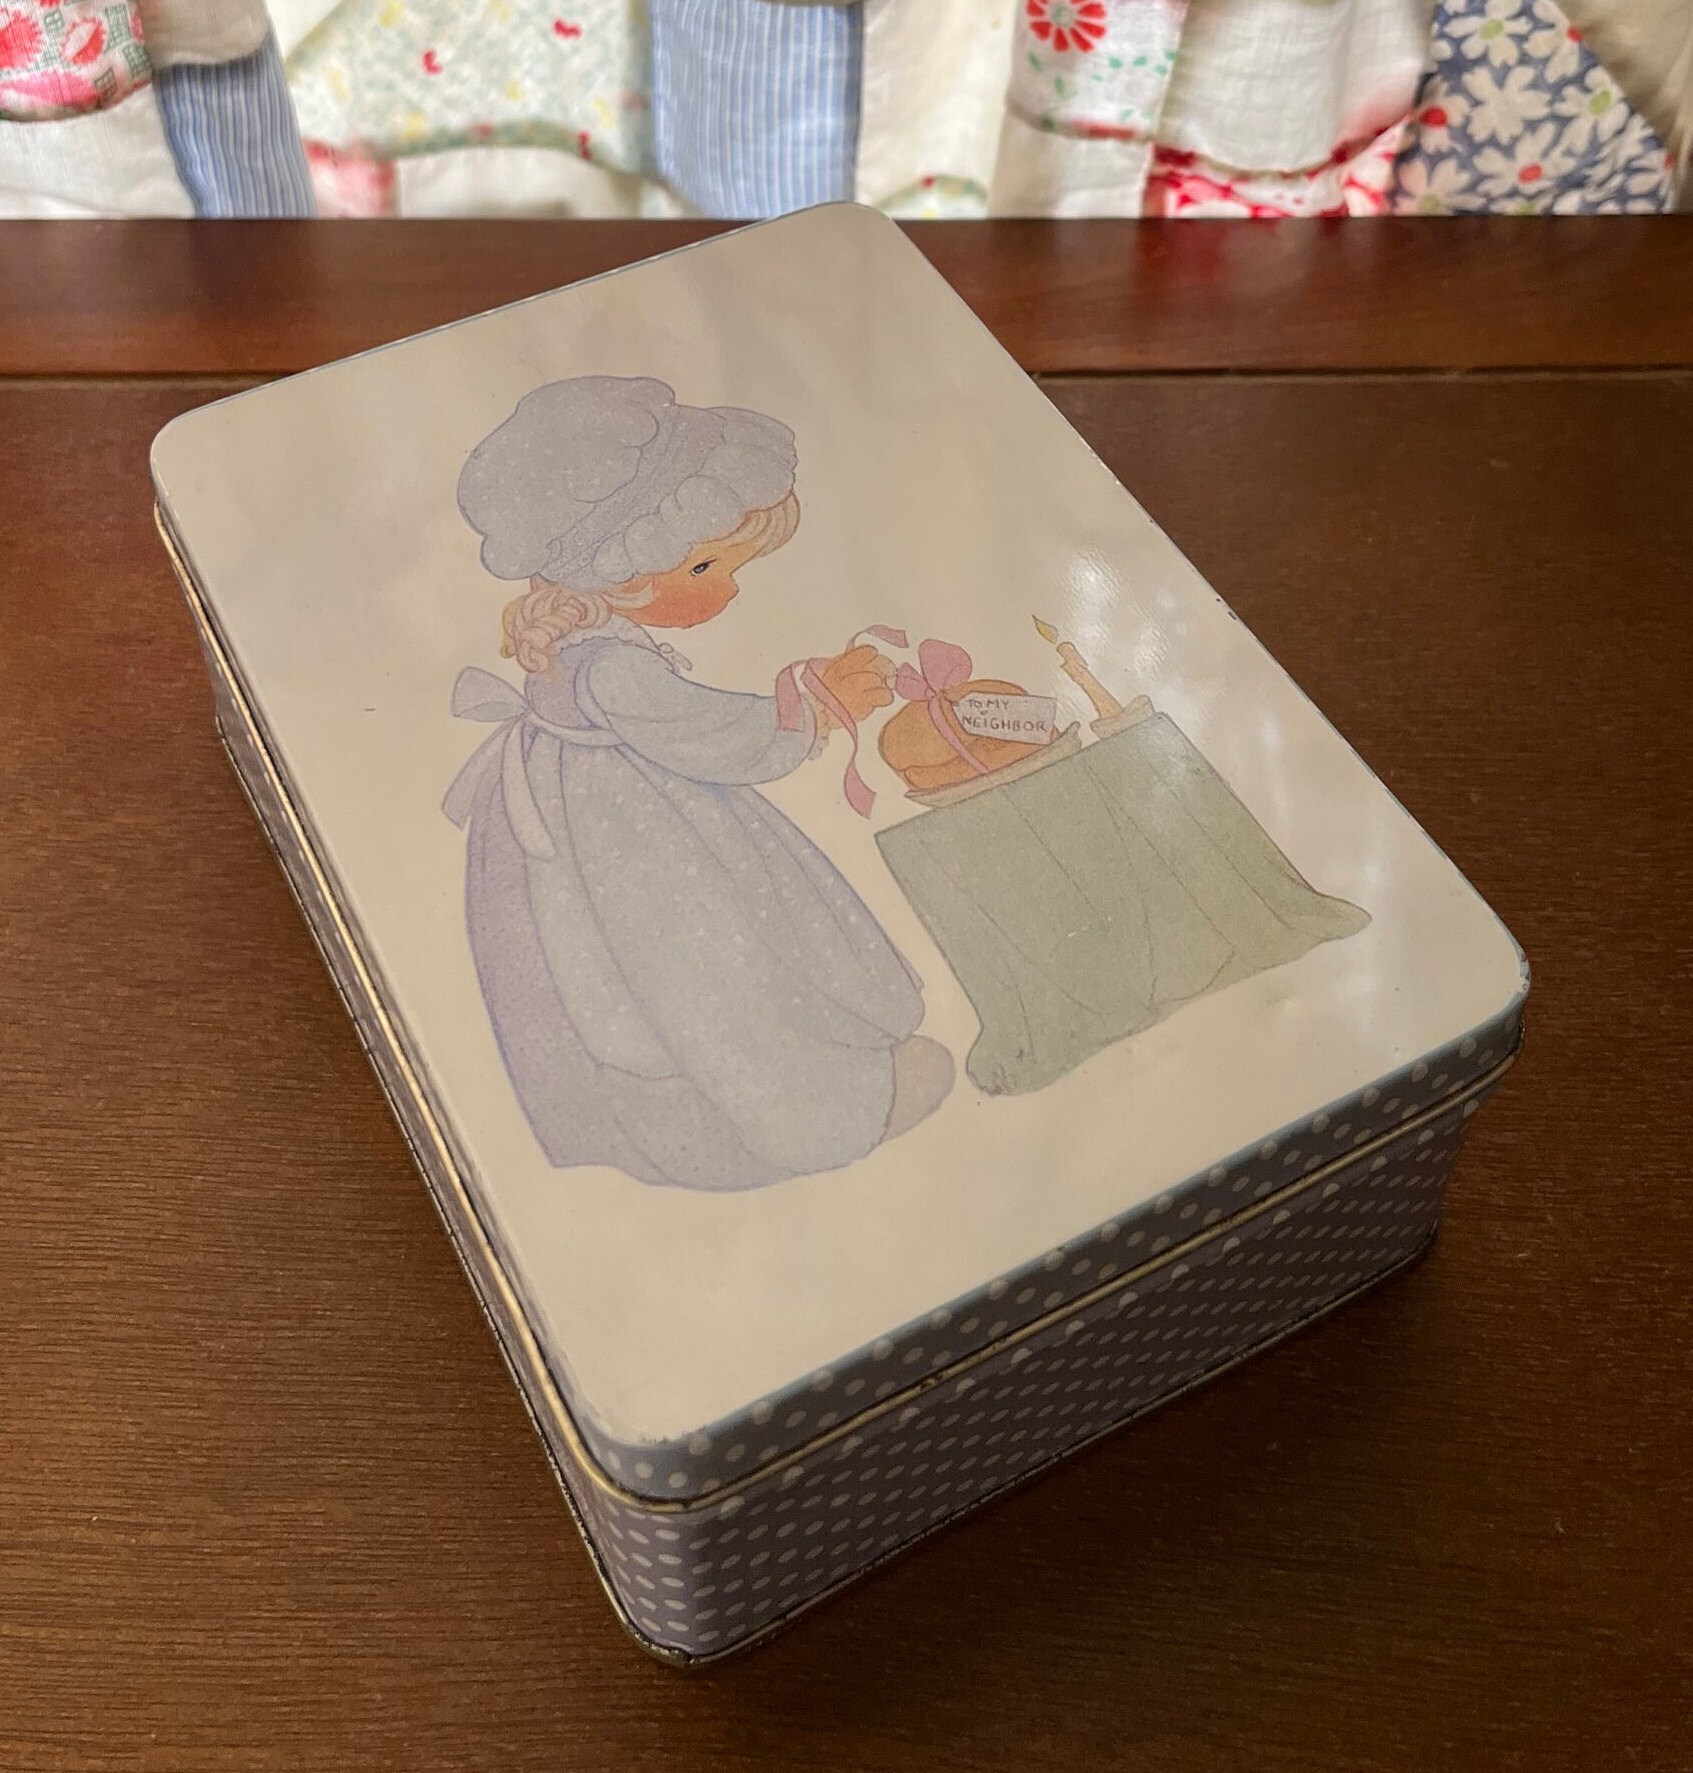 Vintage Precious Moments Tin, Girl Tying Bow on Loaf of Bread, to